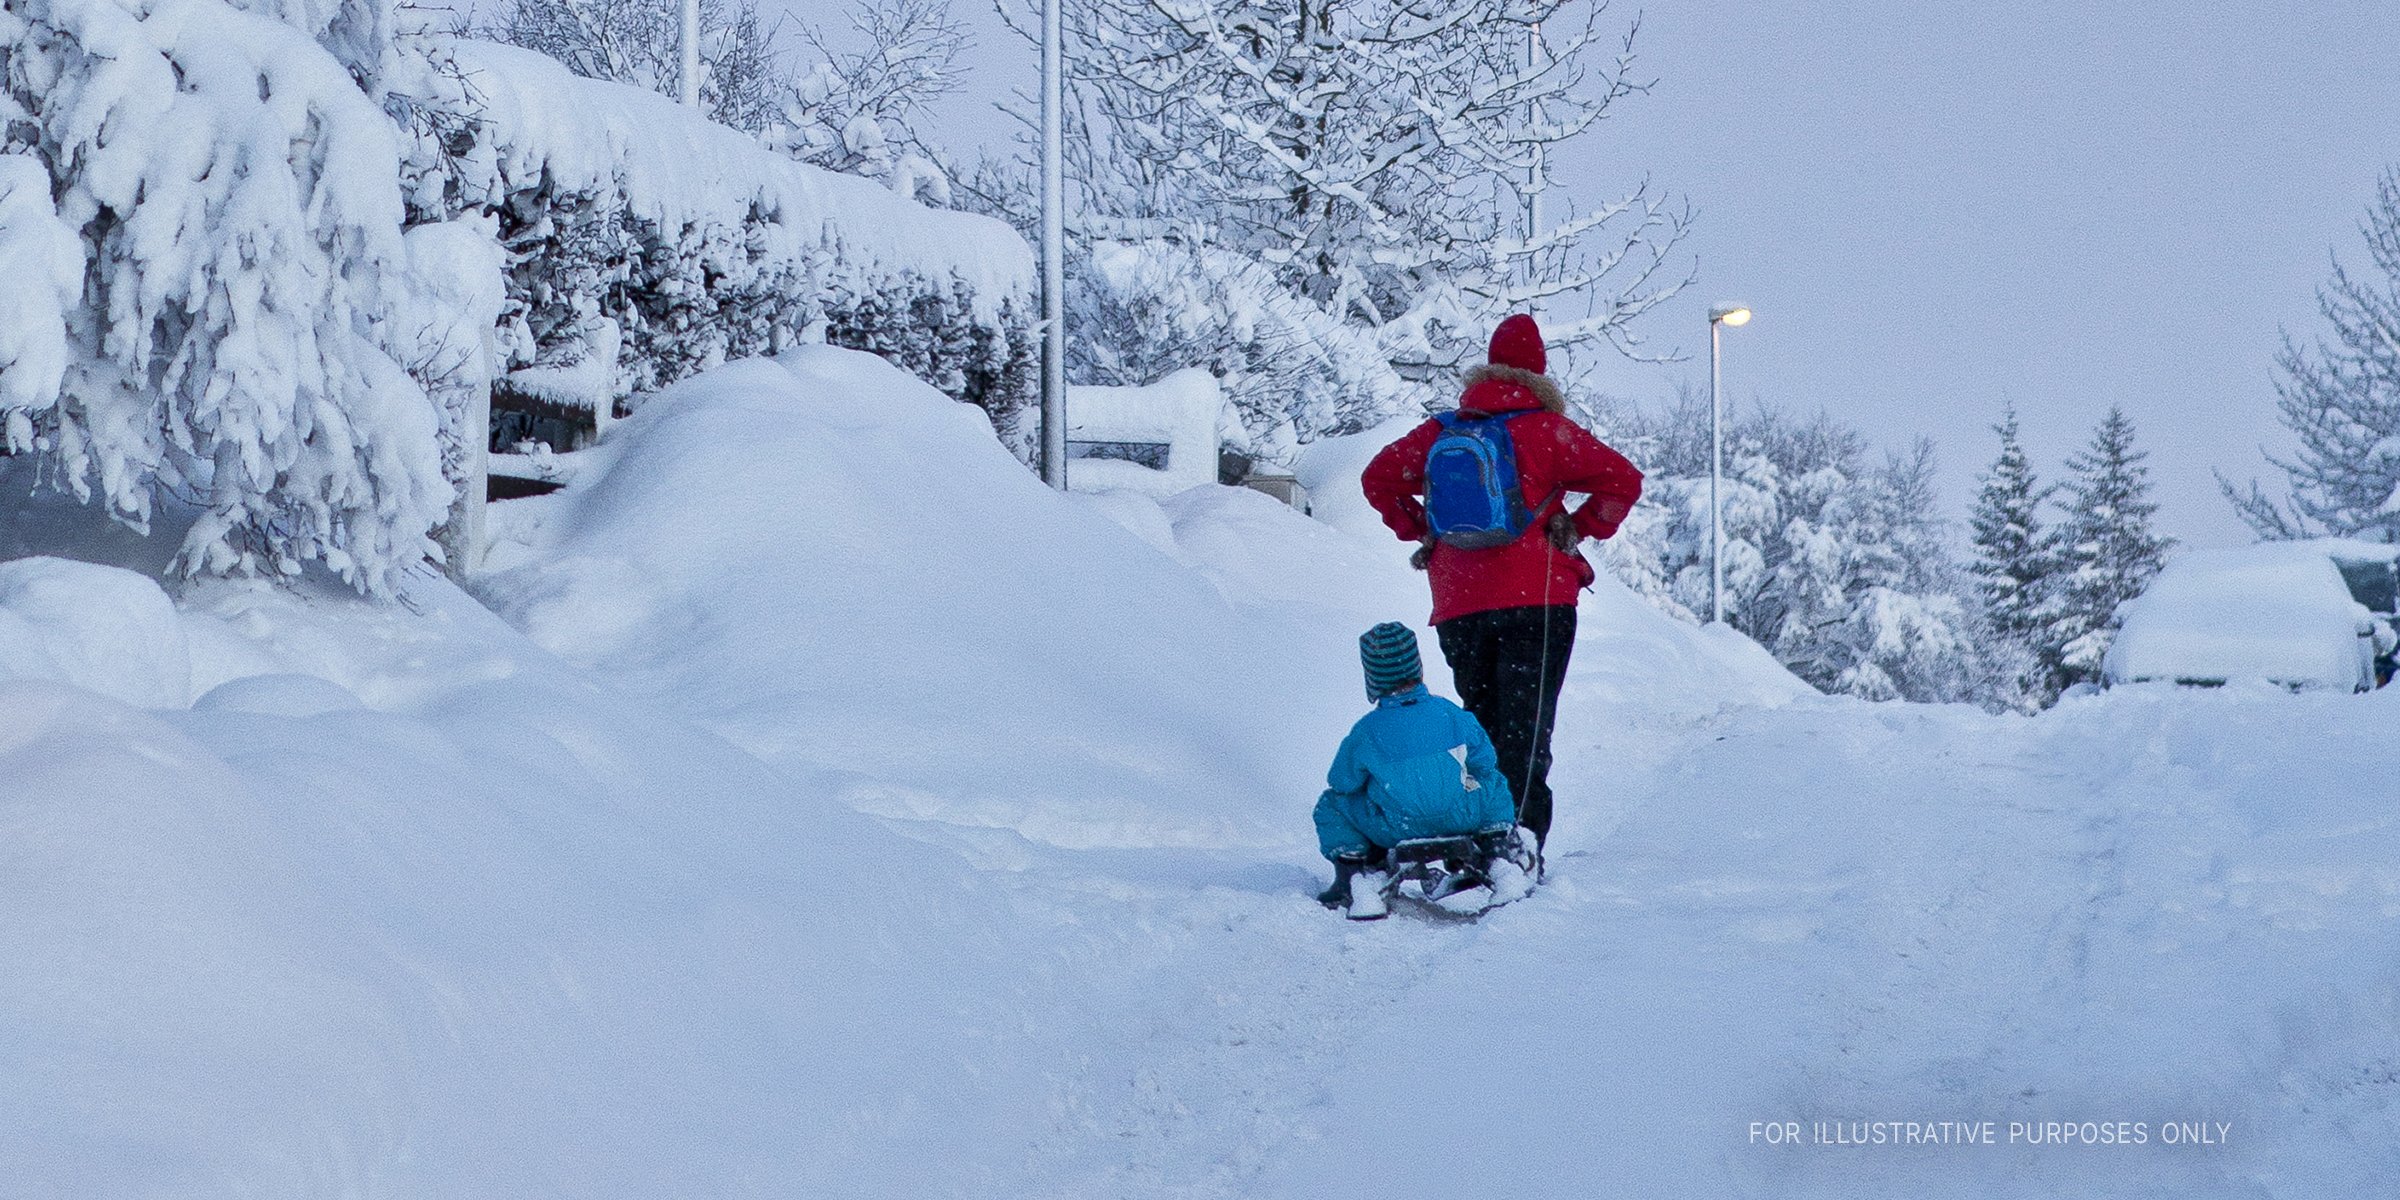 Adult carrying a kid in a snow sled | Source: Shutterstock